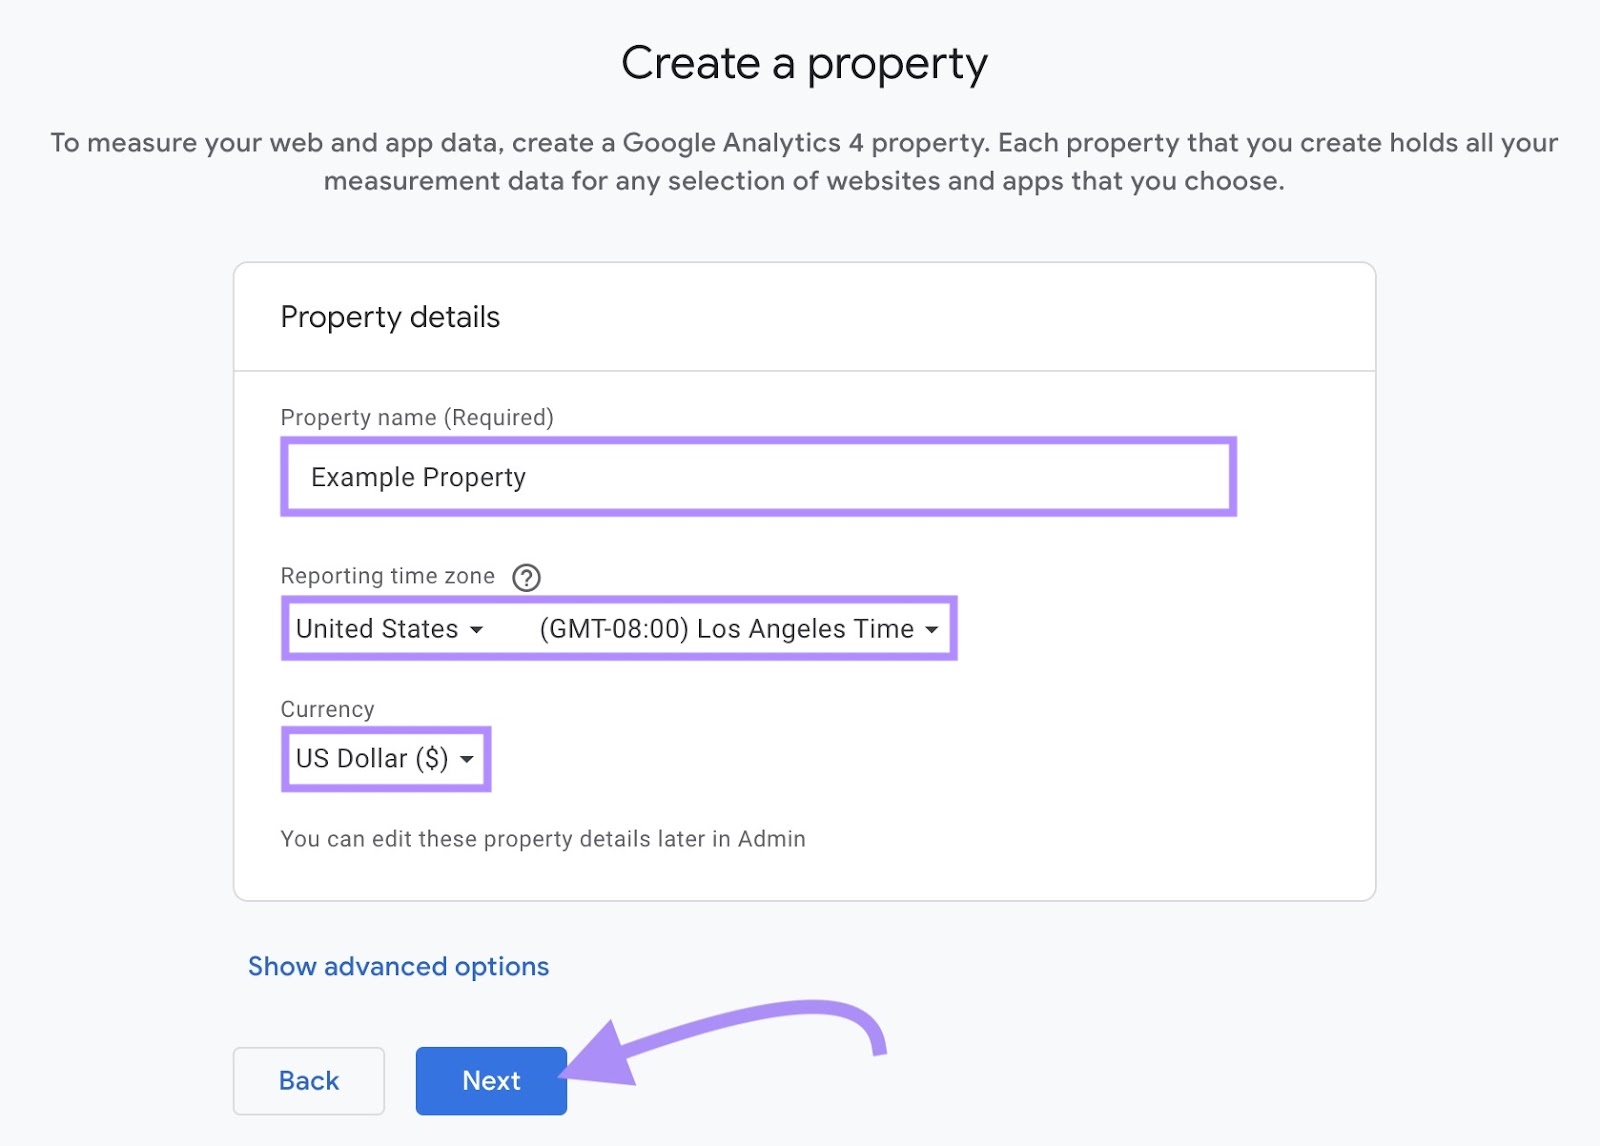 Property name, Reporting clip  zone, and Currency fields